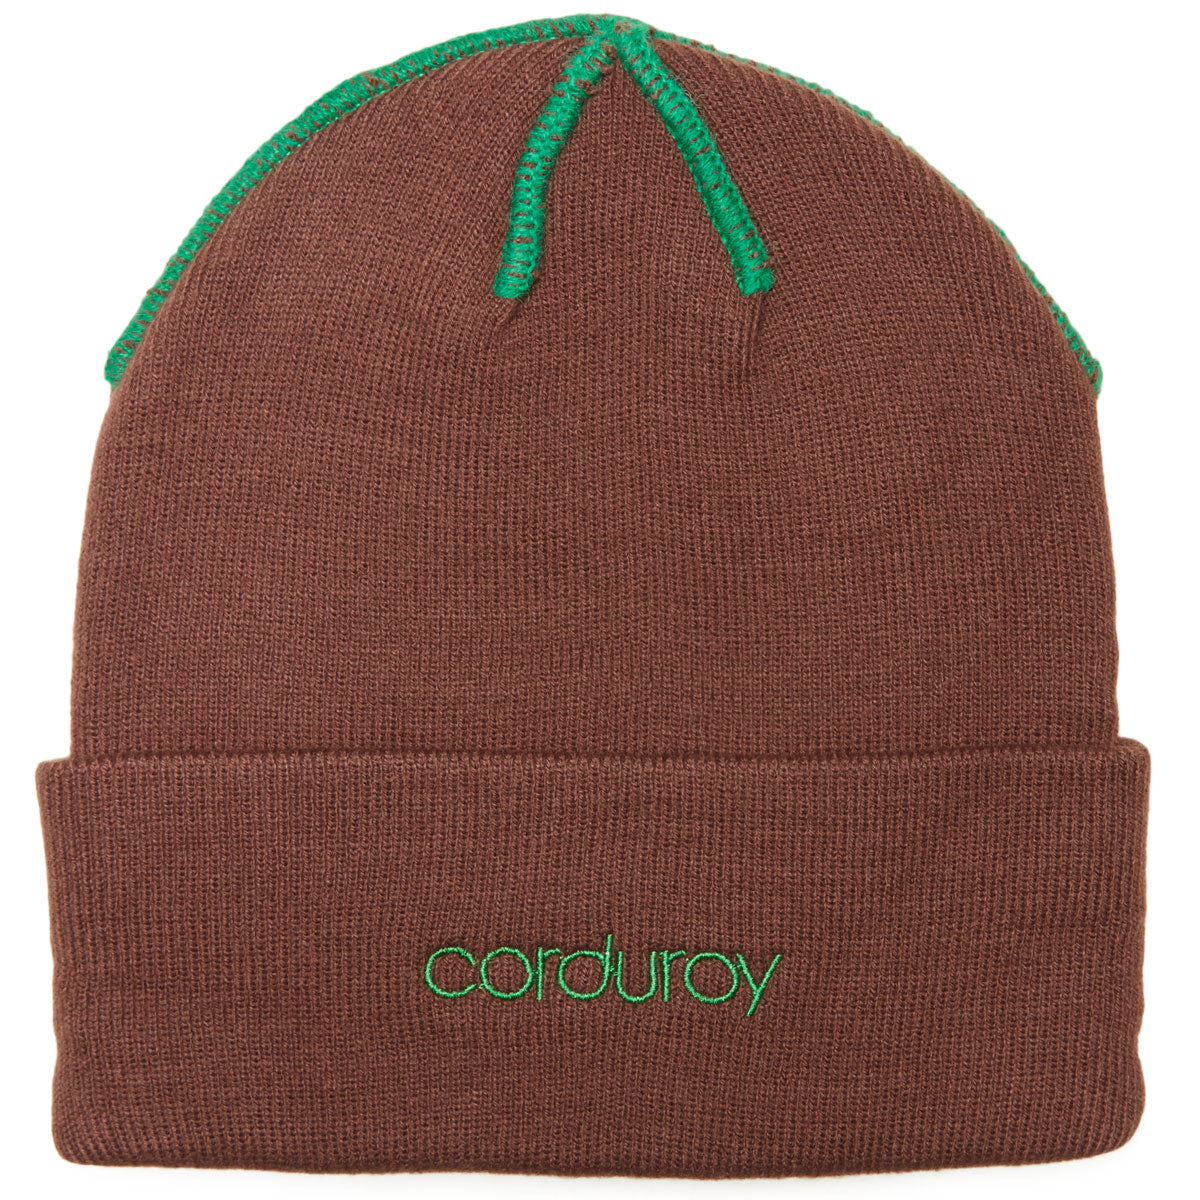 Inside Out Beanie (Brown)